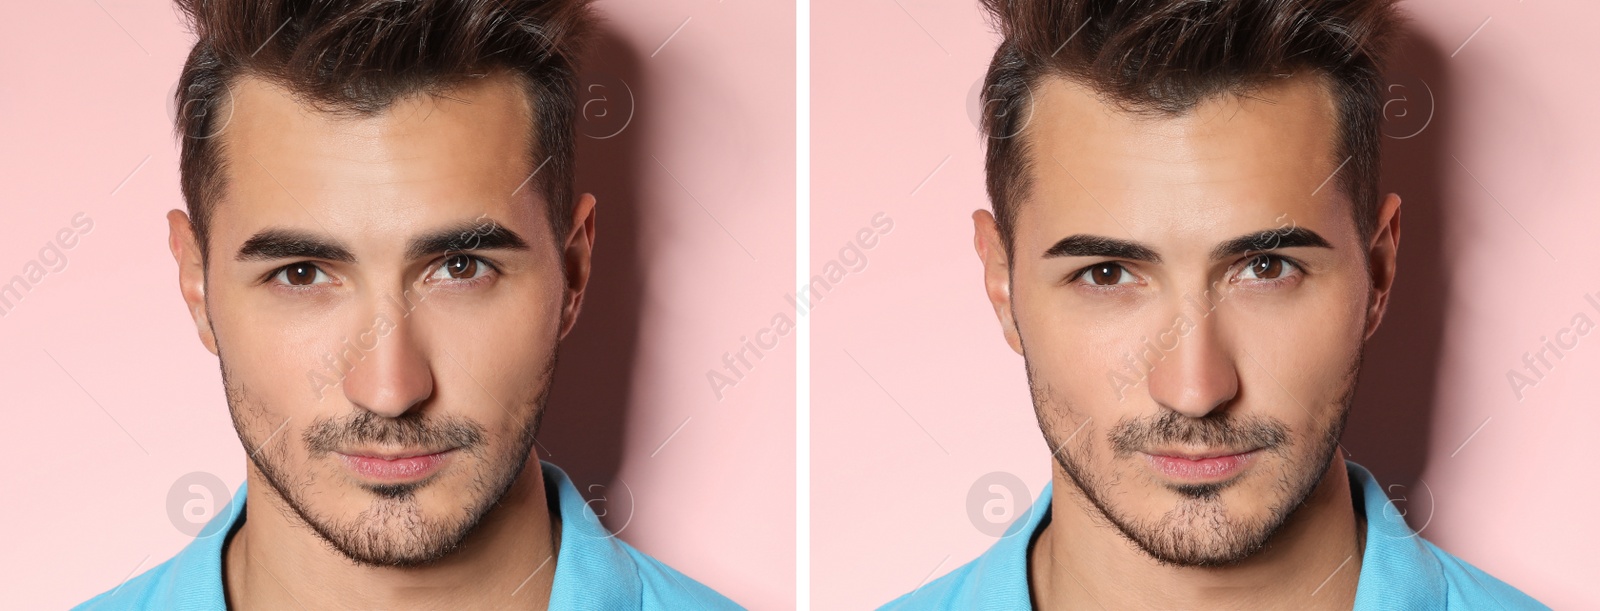 Image of Collage with photos of man before and after eyebrow modeling on pink background. Banner design